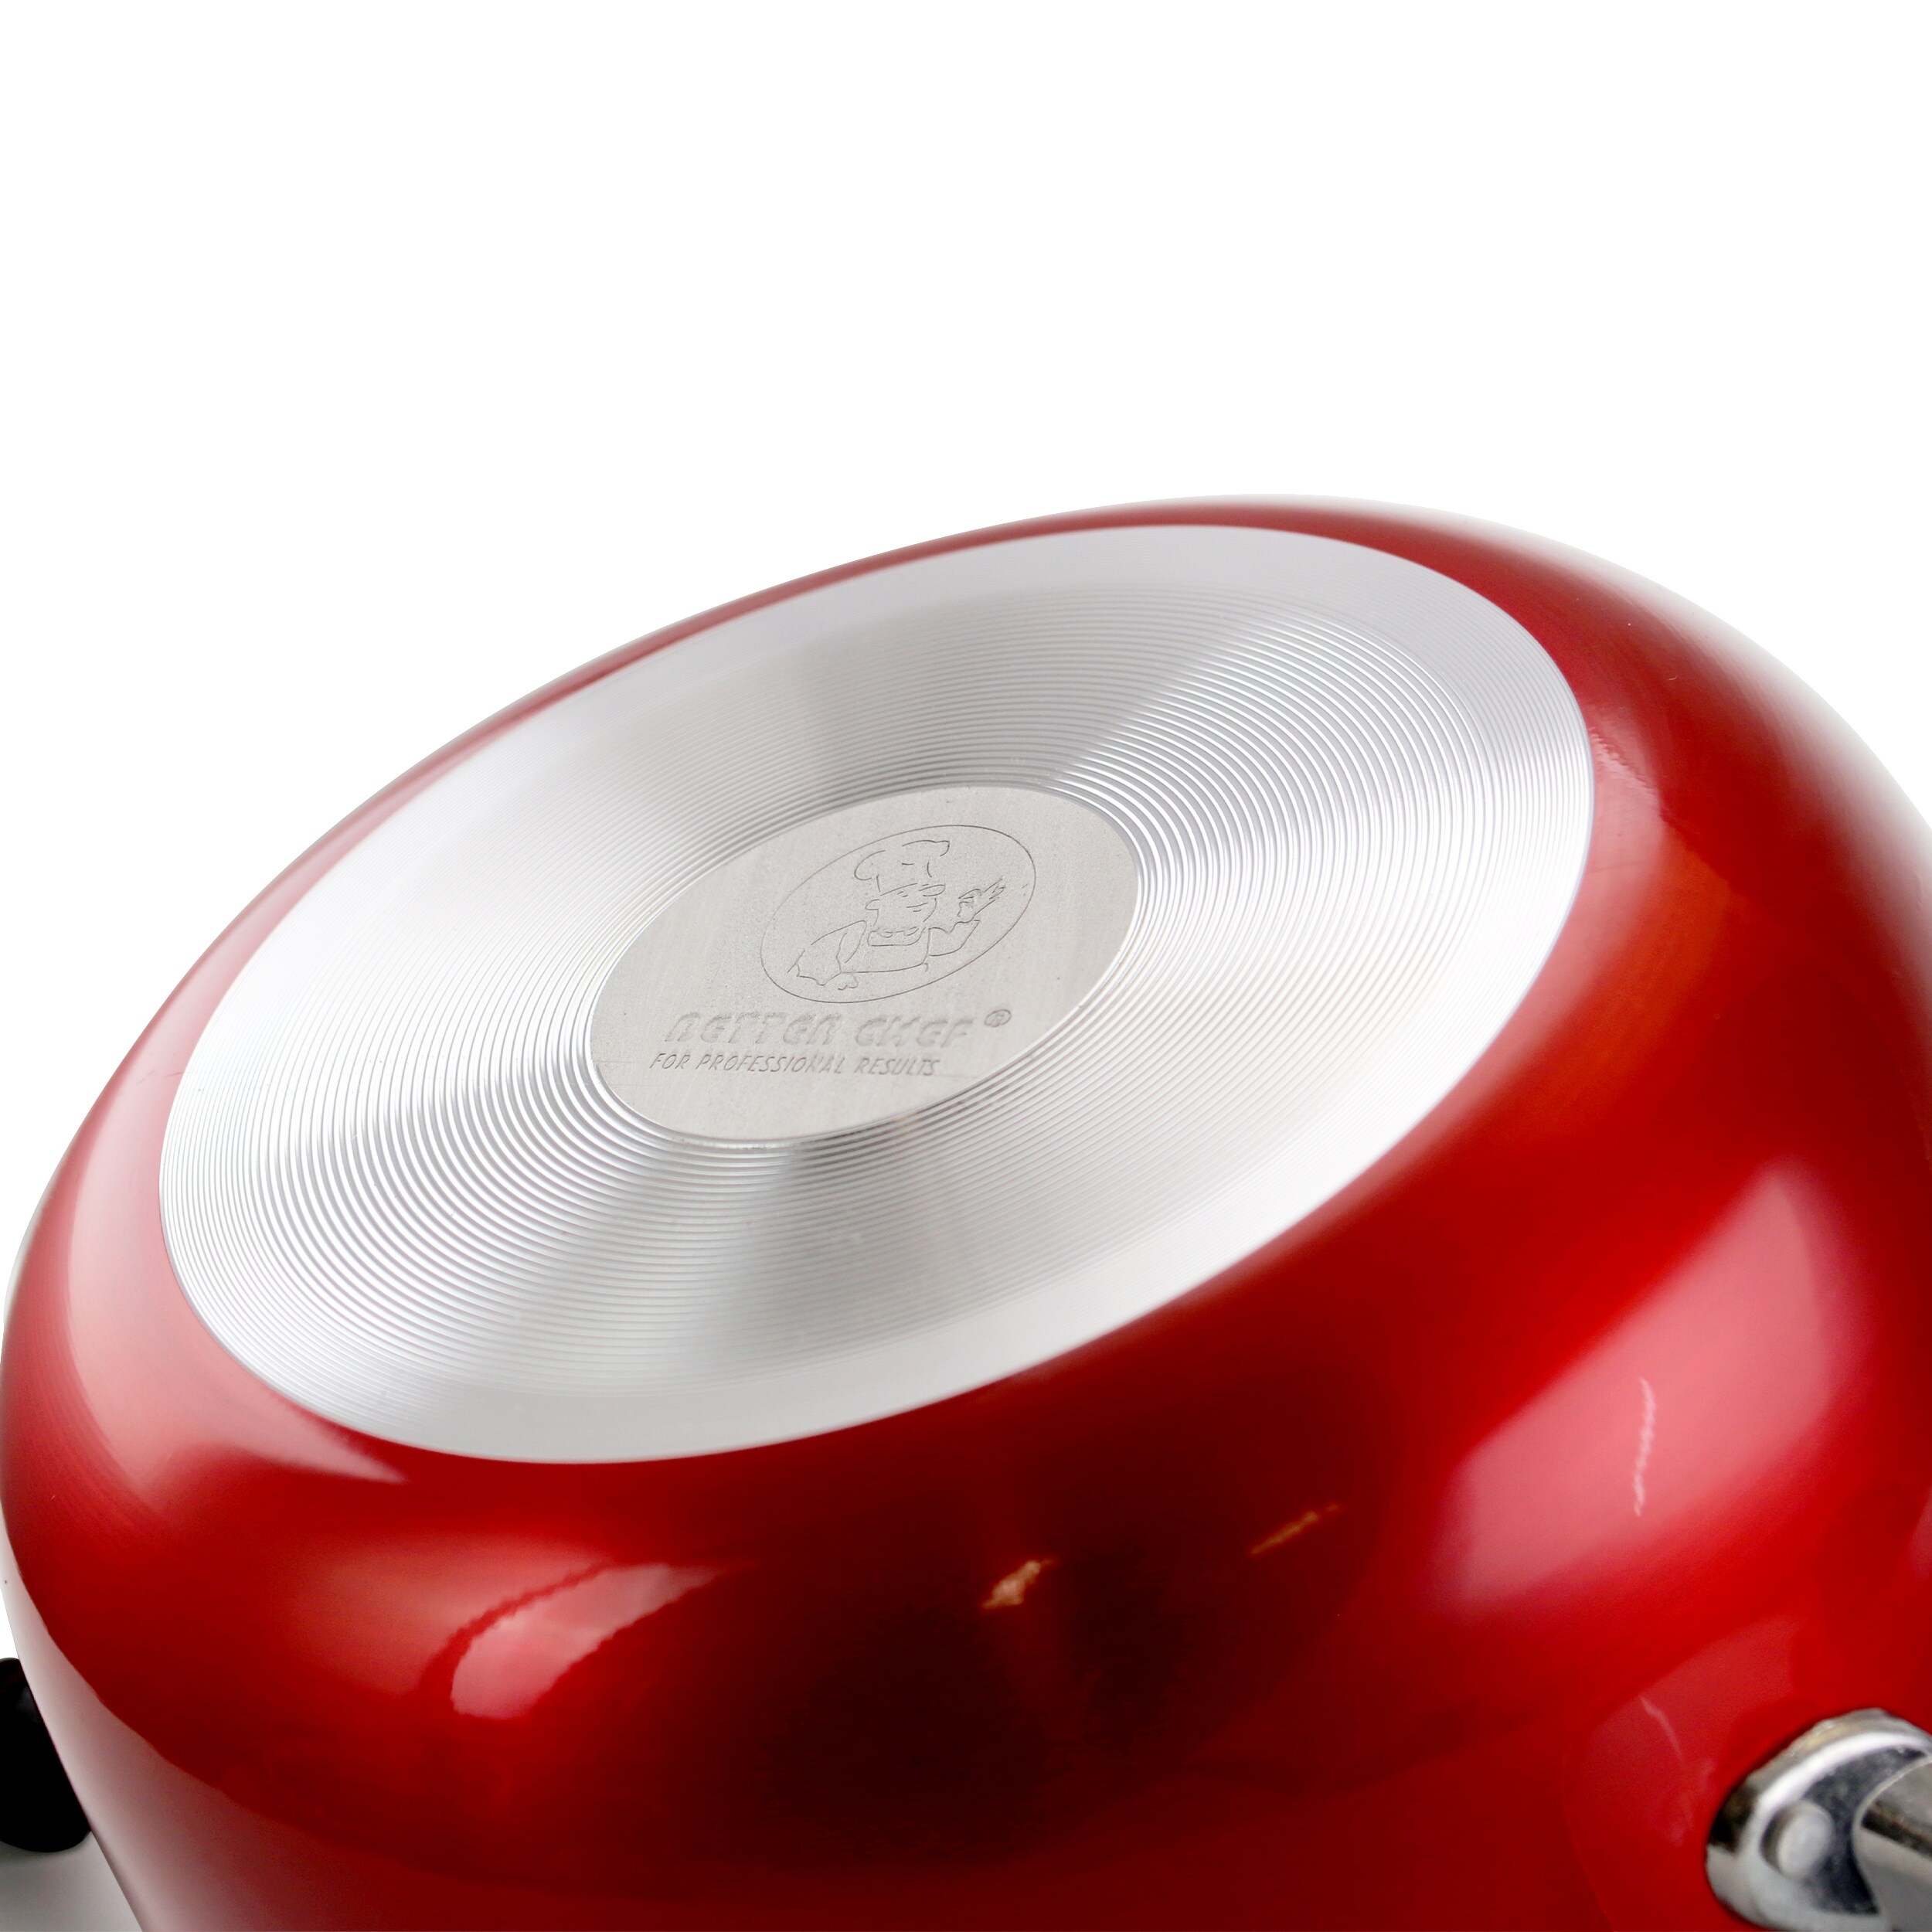 Better Chef 2 qt. Aluminum Ceramic Coated Saucepan in Red with